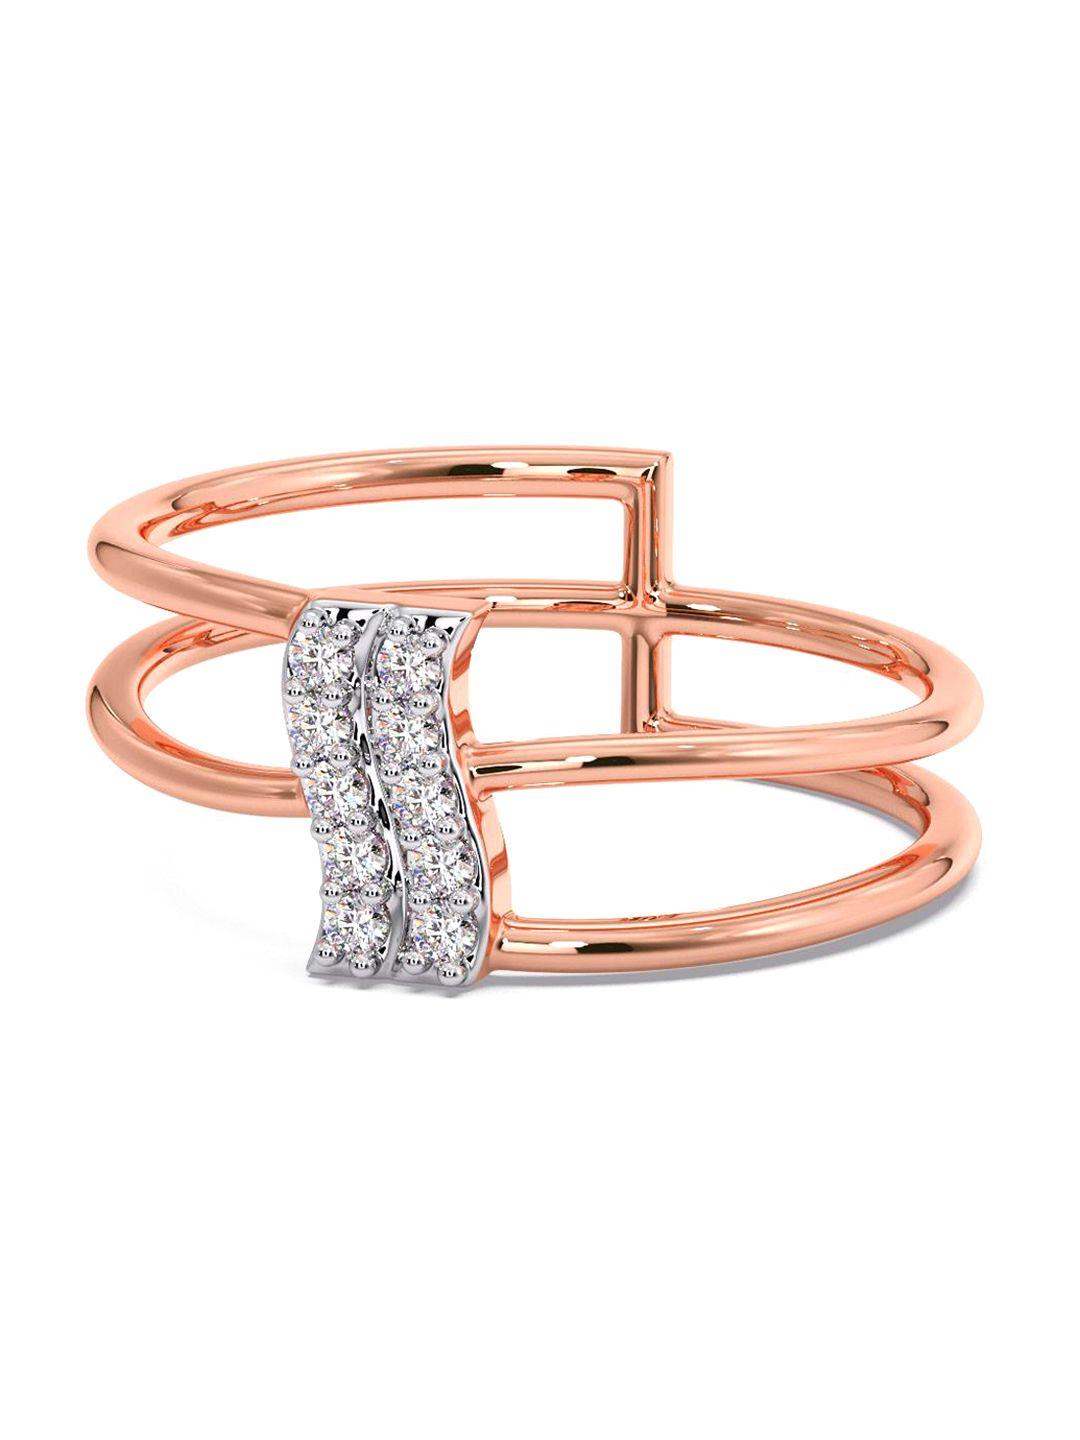 candere a kalyan jewellers company 18kt rose gold diamond finger ring-2.24gm